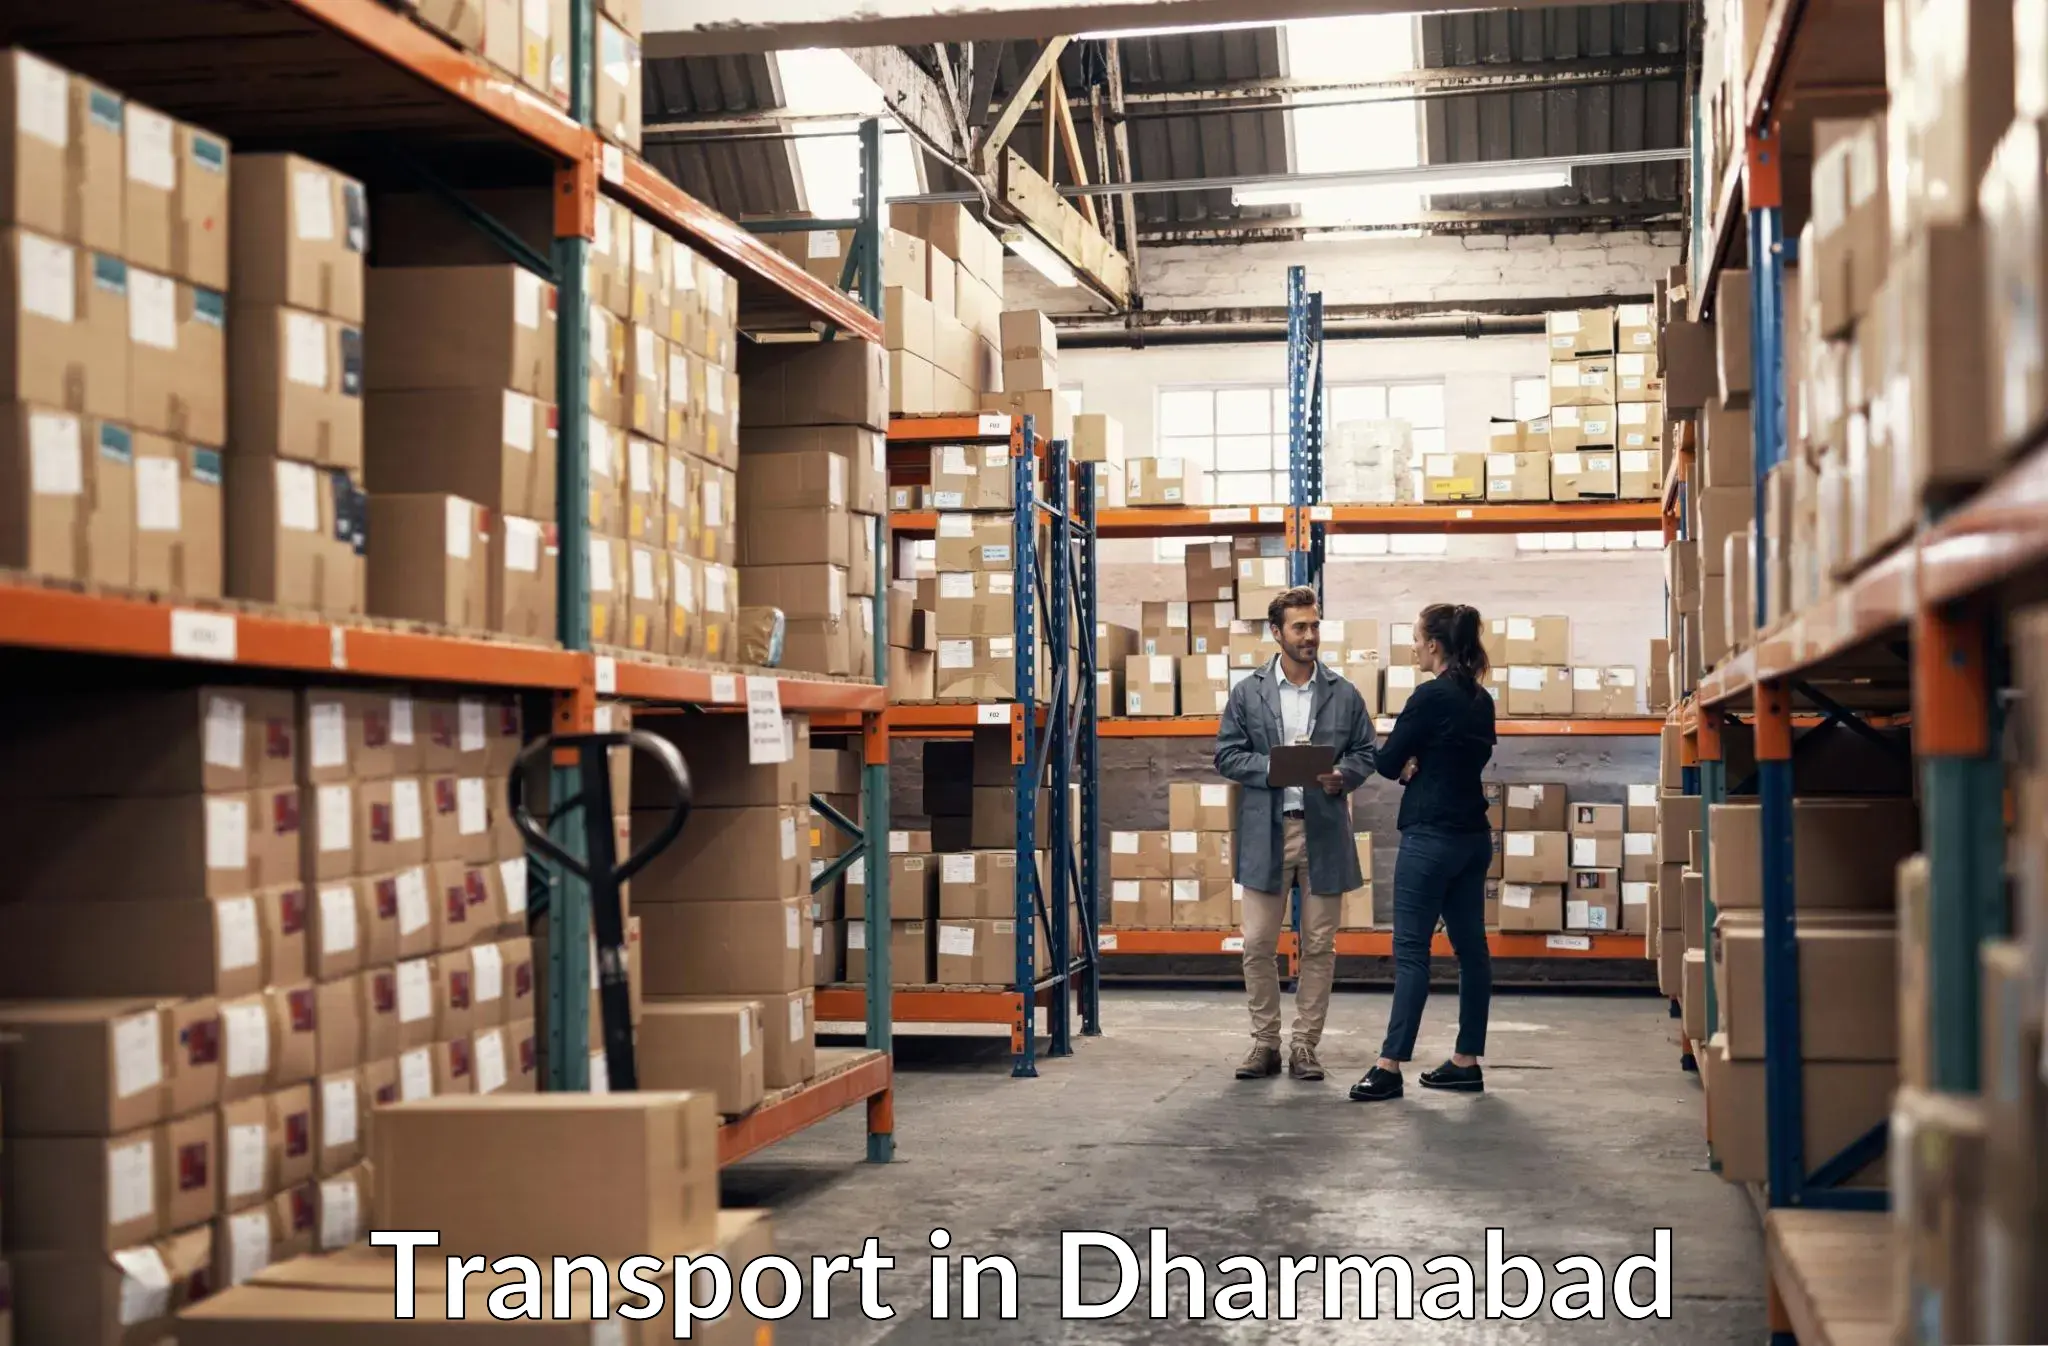 Furniture transport service in Dharmabad